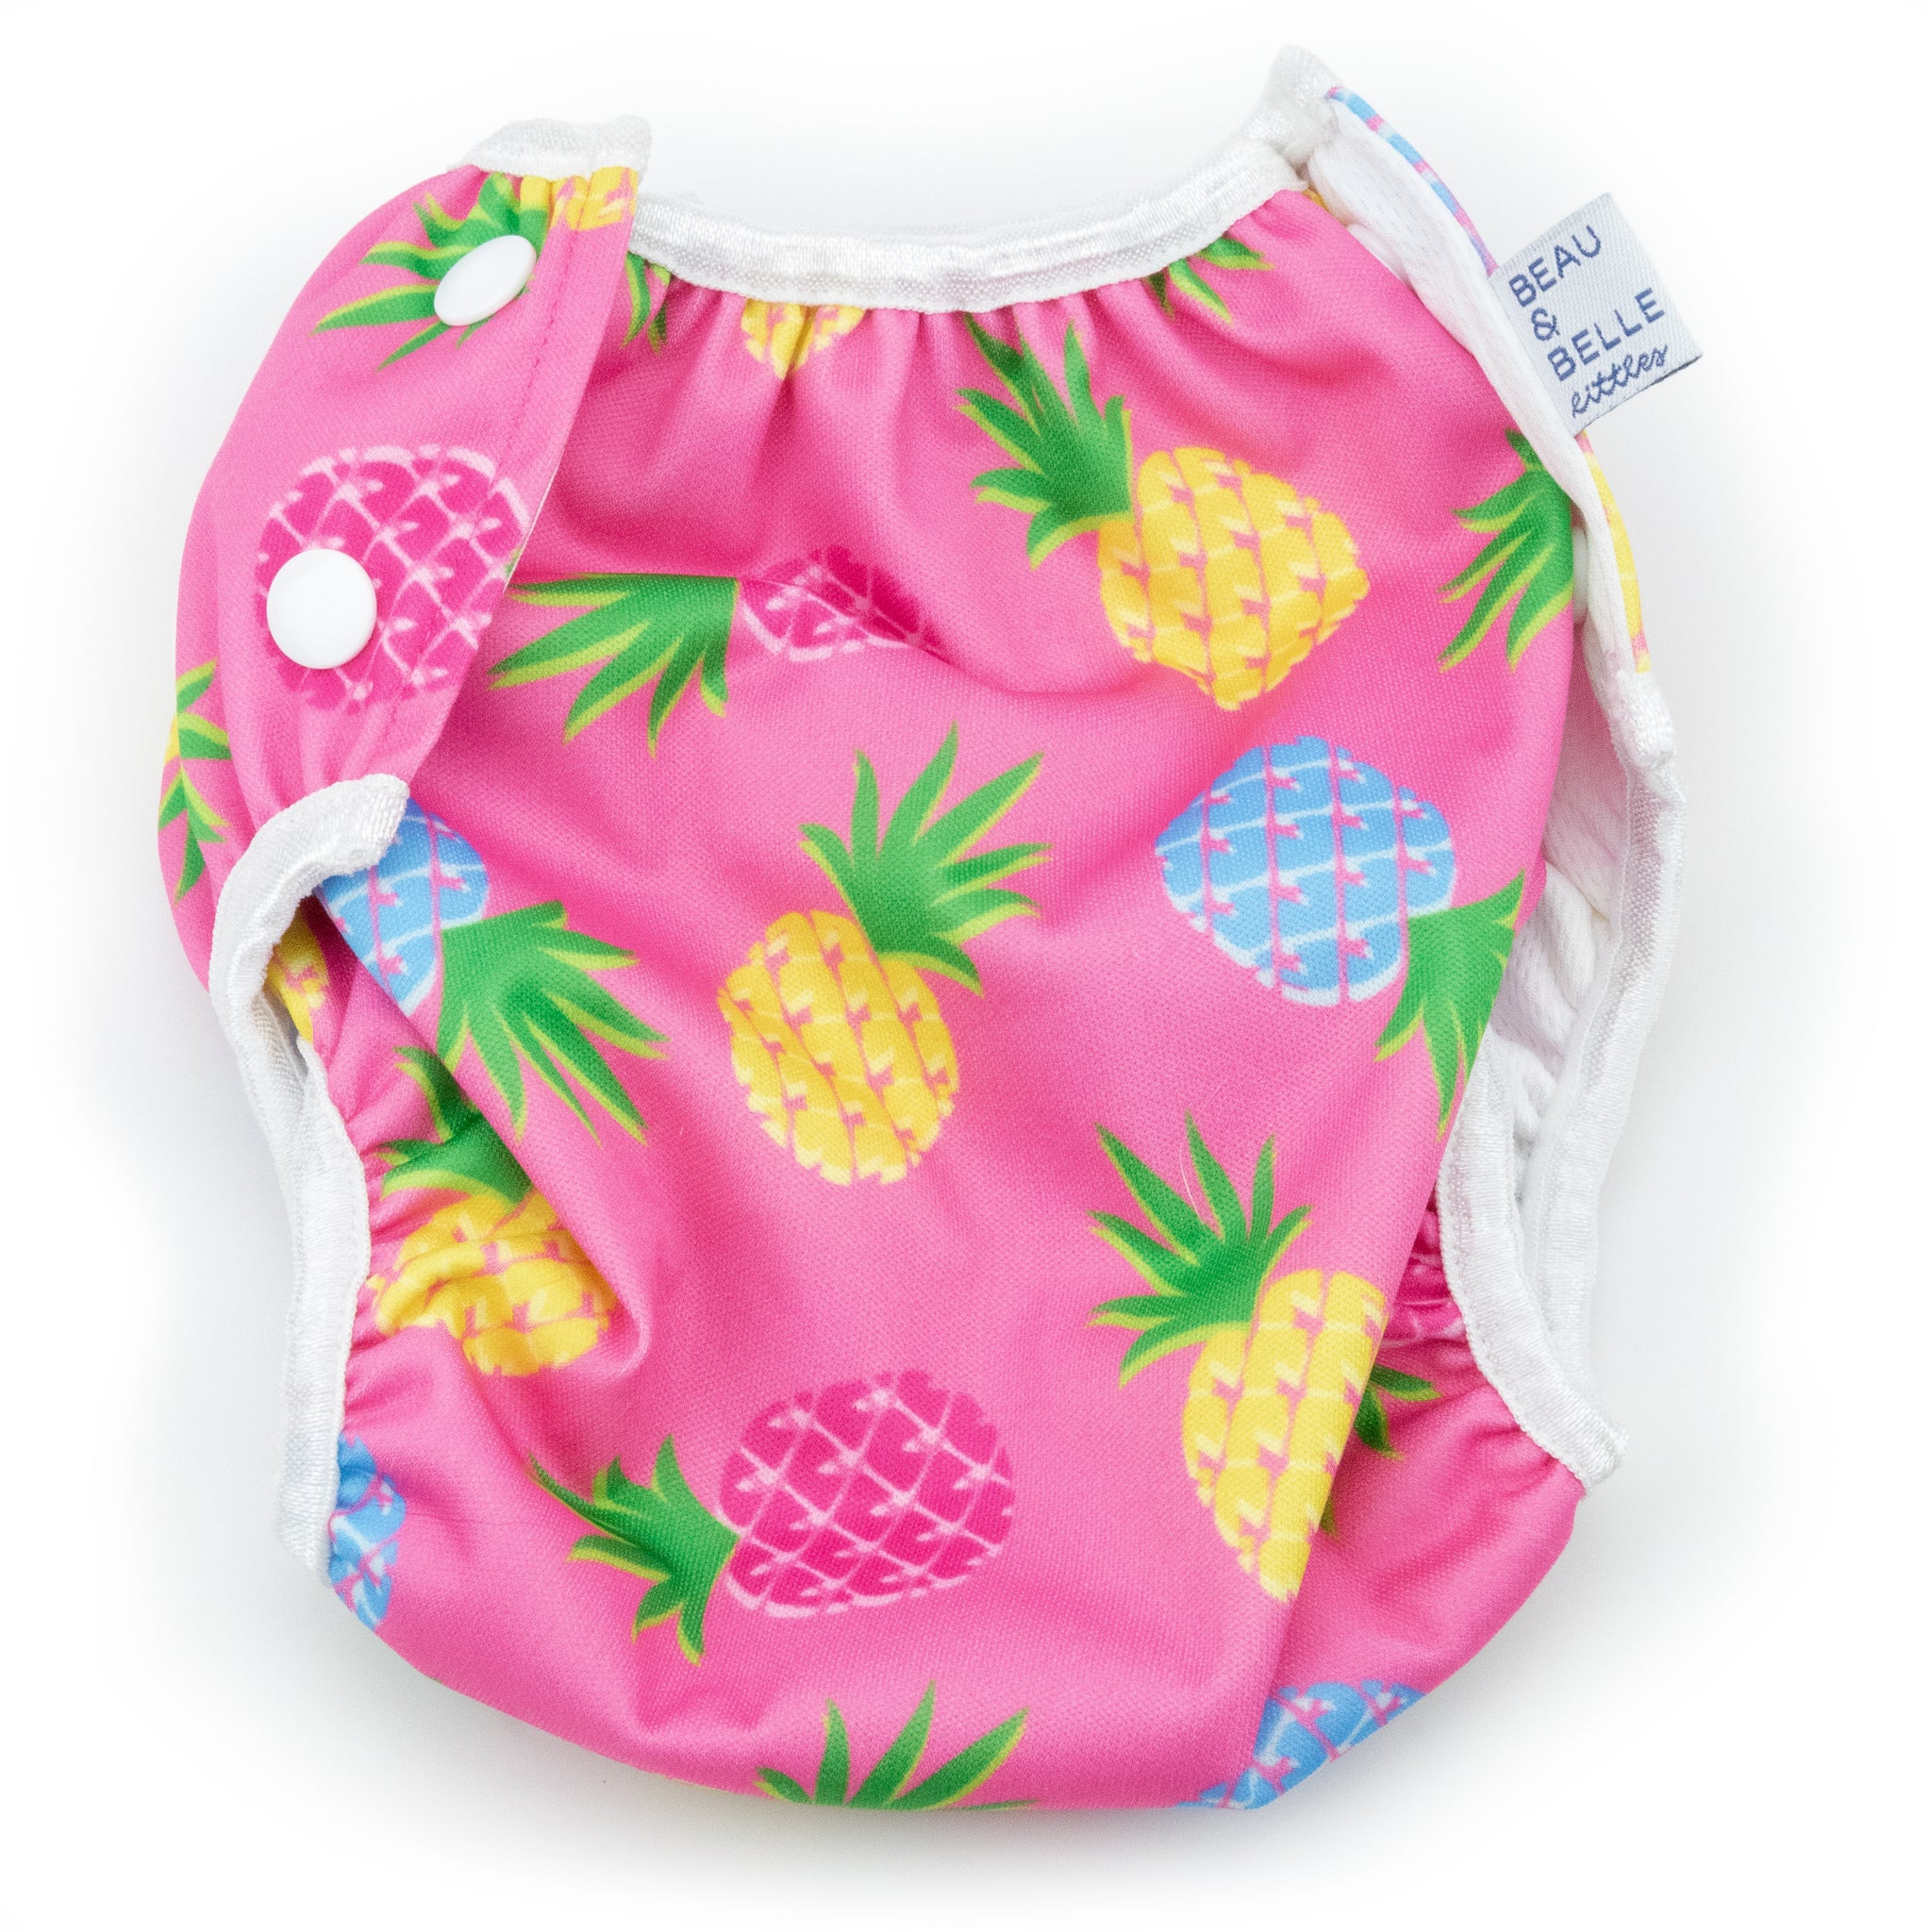 Beau and Belle Littles Swim Diaper, Large Size, light pink background with yellow, dark pink, and blue pineapples, flat lay, back view